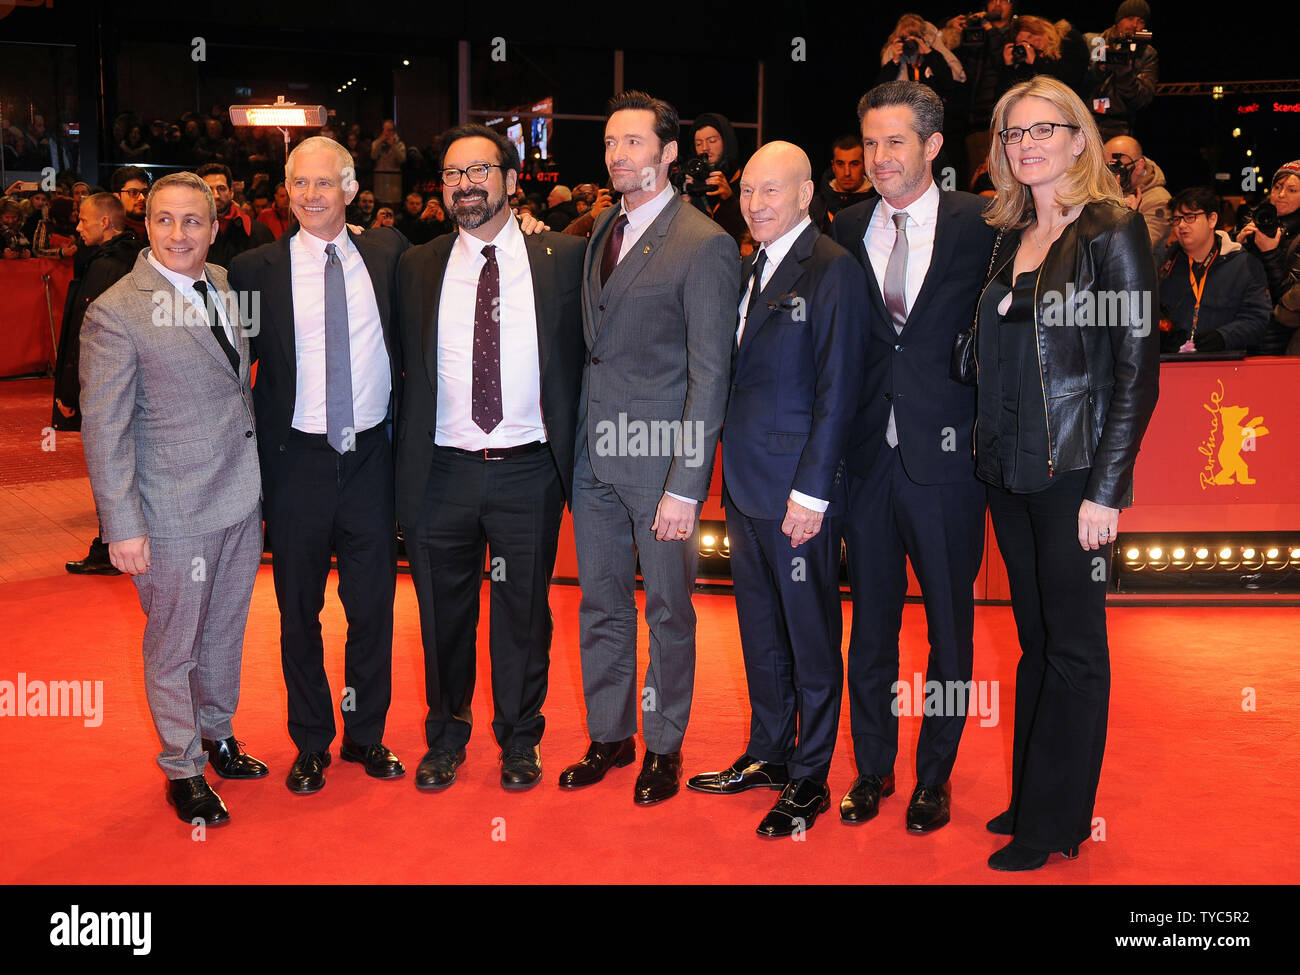 American producer Hutch Parker, American director James Mangold, Australian actor Hugh Jackman, British actor Patrick Stewart and British producer Simon Kinberg attend the premiere for Logan at the Grand Hyatt Hotel in Berlin on February 17, 2017. Photo by Paul Treadway/ UPI Stock Photo